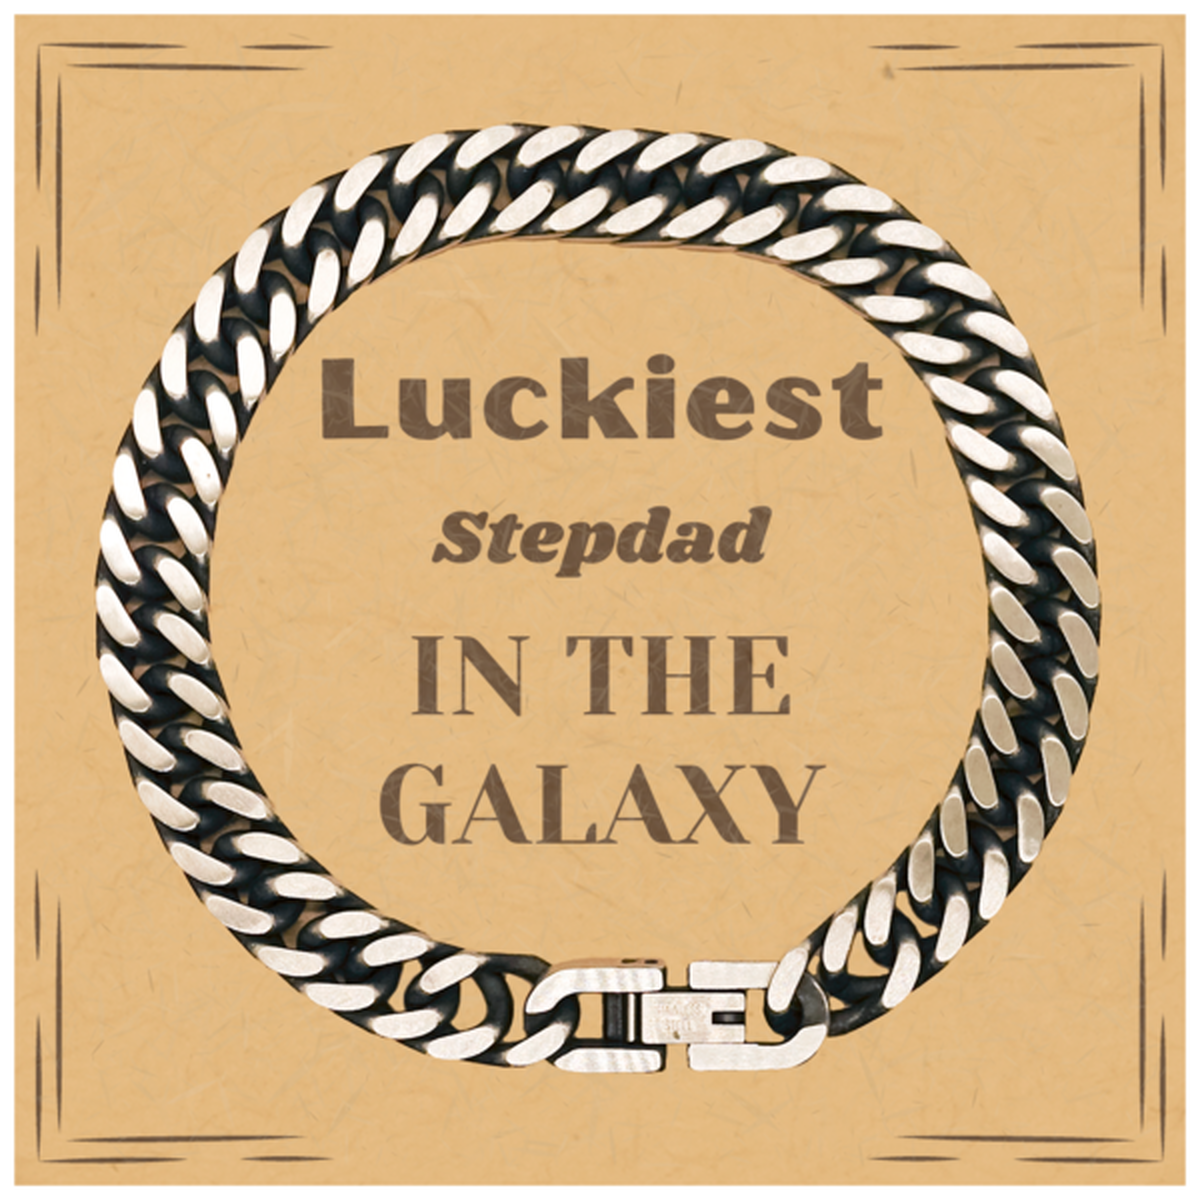 Luckiest Stepdad in the Galaxy, To My Stepdad Message Card Gifts, Christmas Stepdad Cuban Link Chain Bracelet Gifts, X-mas Birthday Unique Gifts For Stepdad Men Women